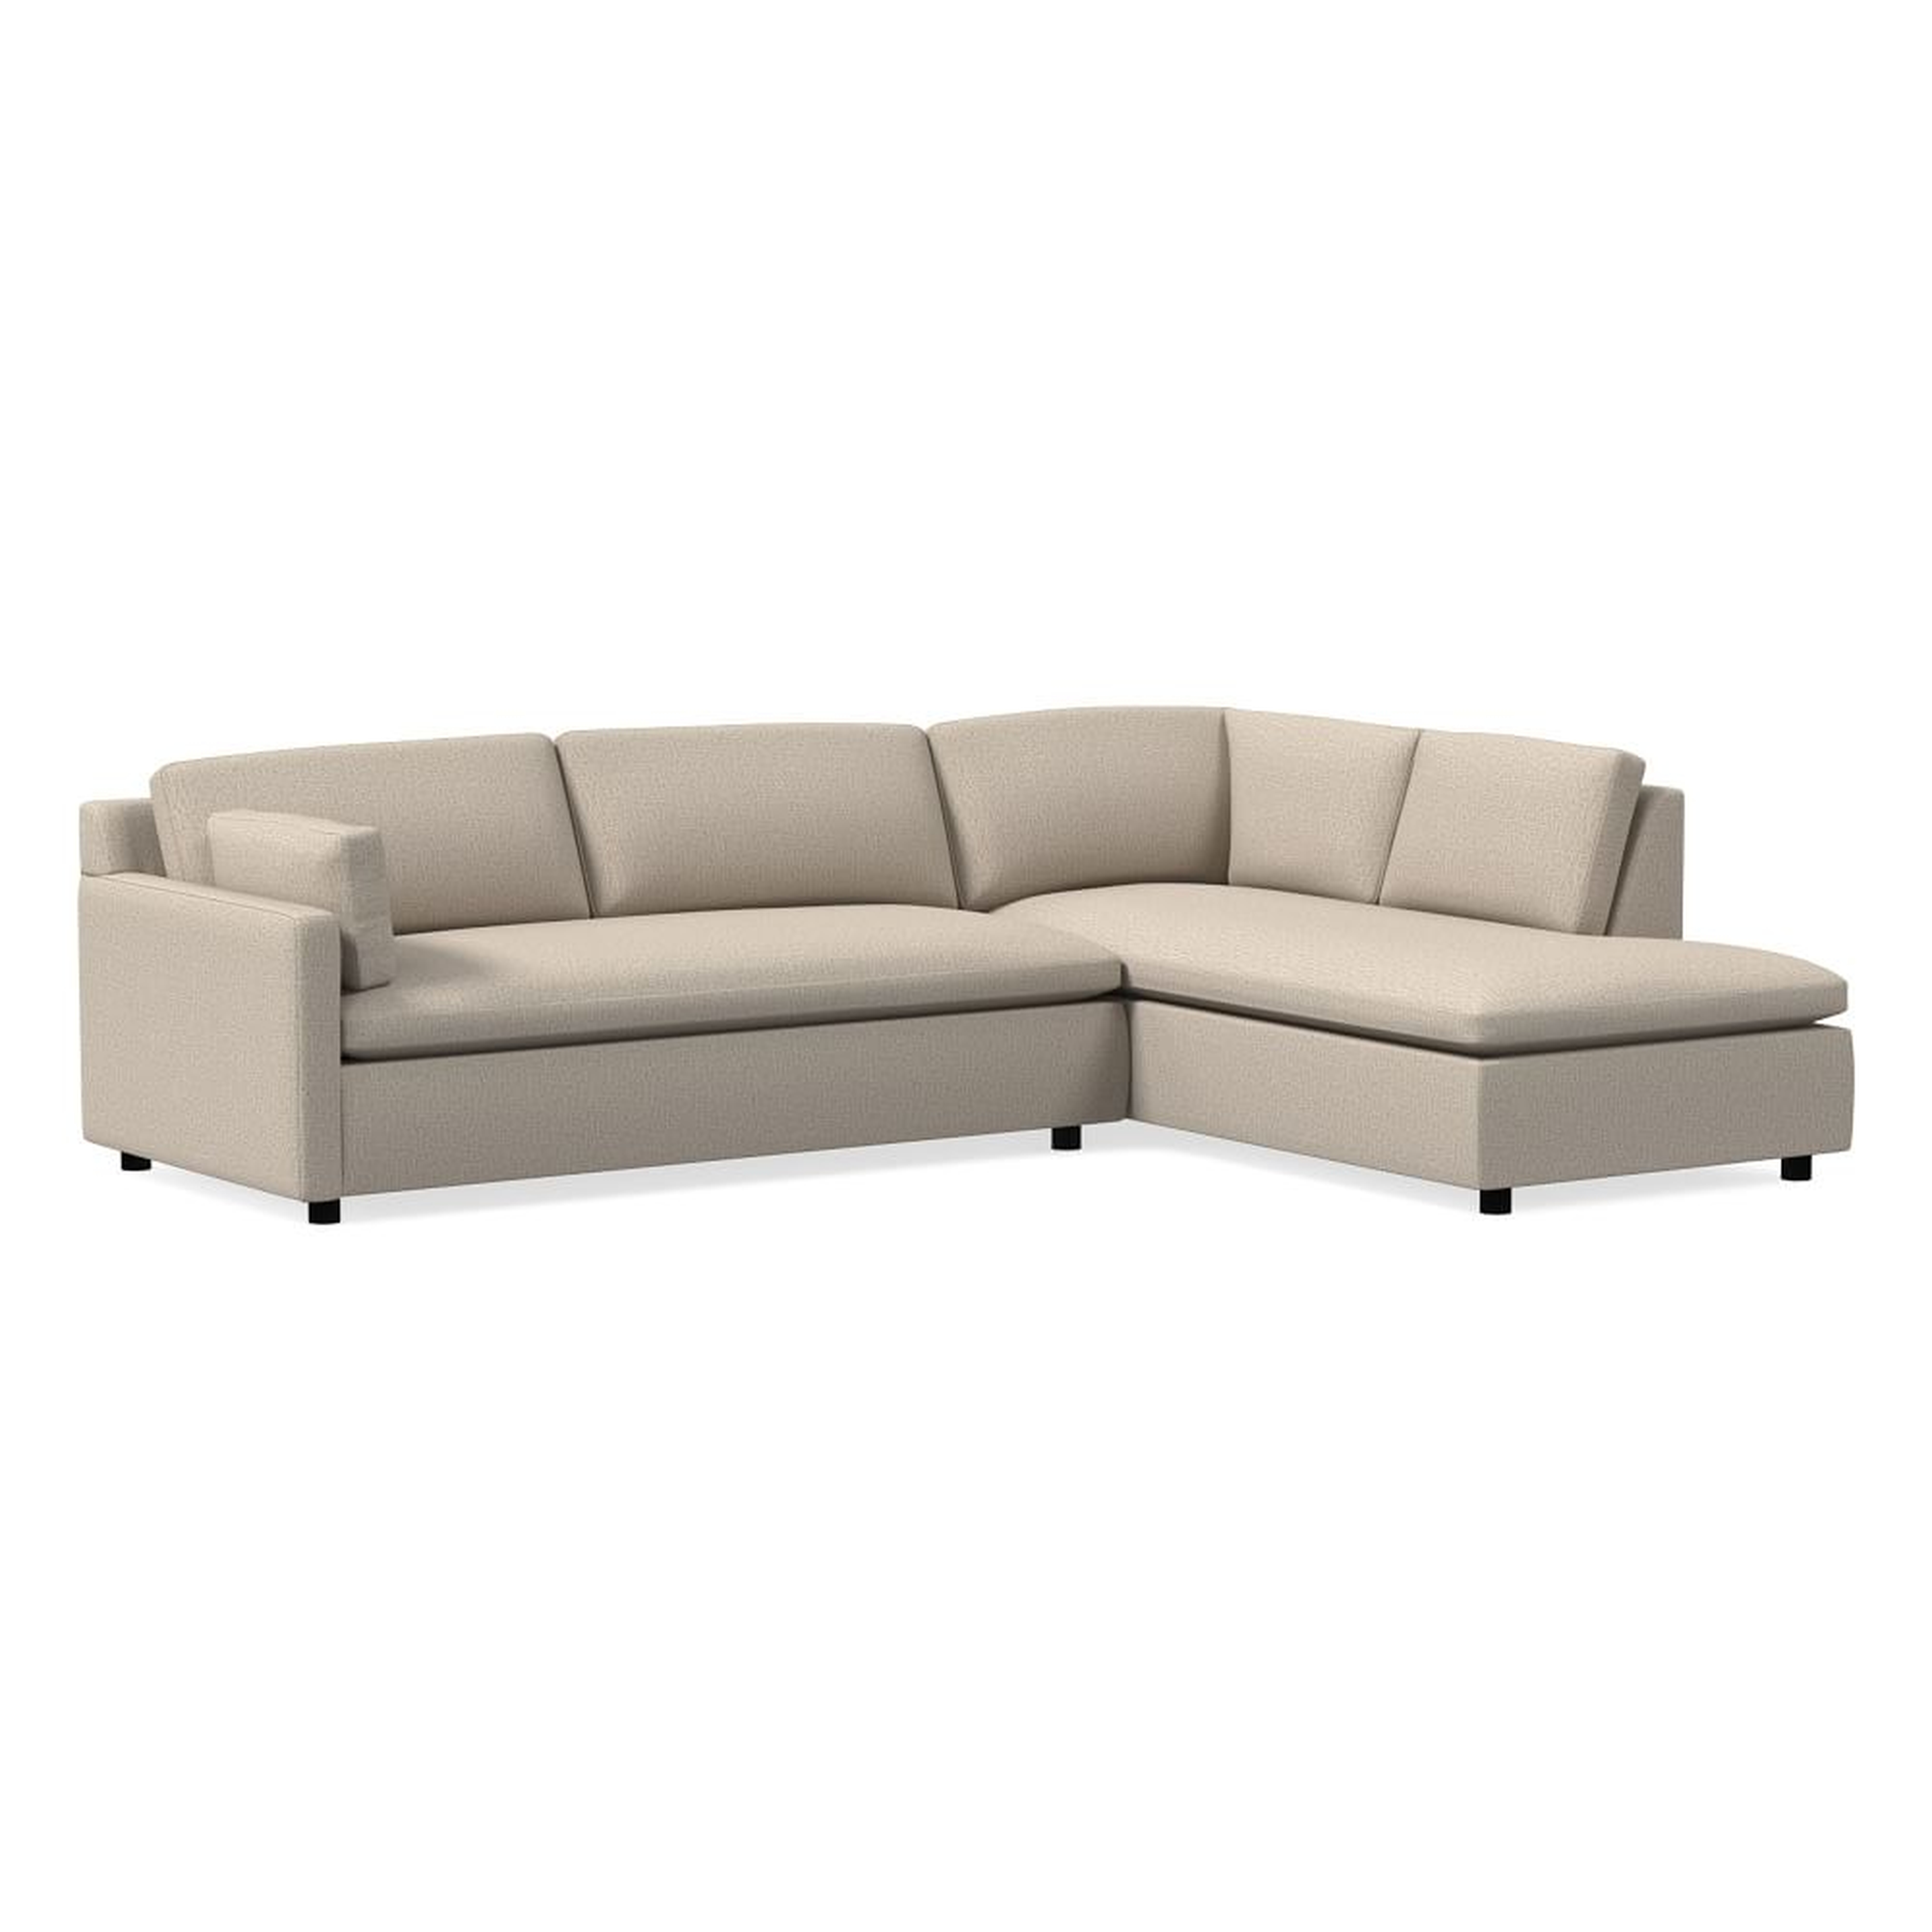 Marin 114" Right Bumper Chaise Sectional, Standard Depth, Deco Weave, clay - West Elm